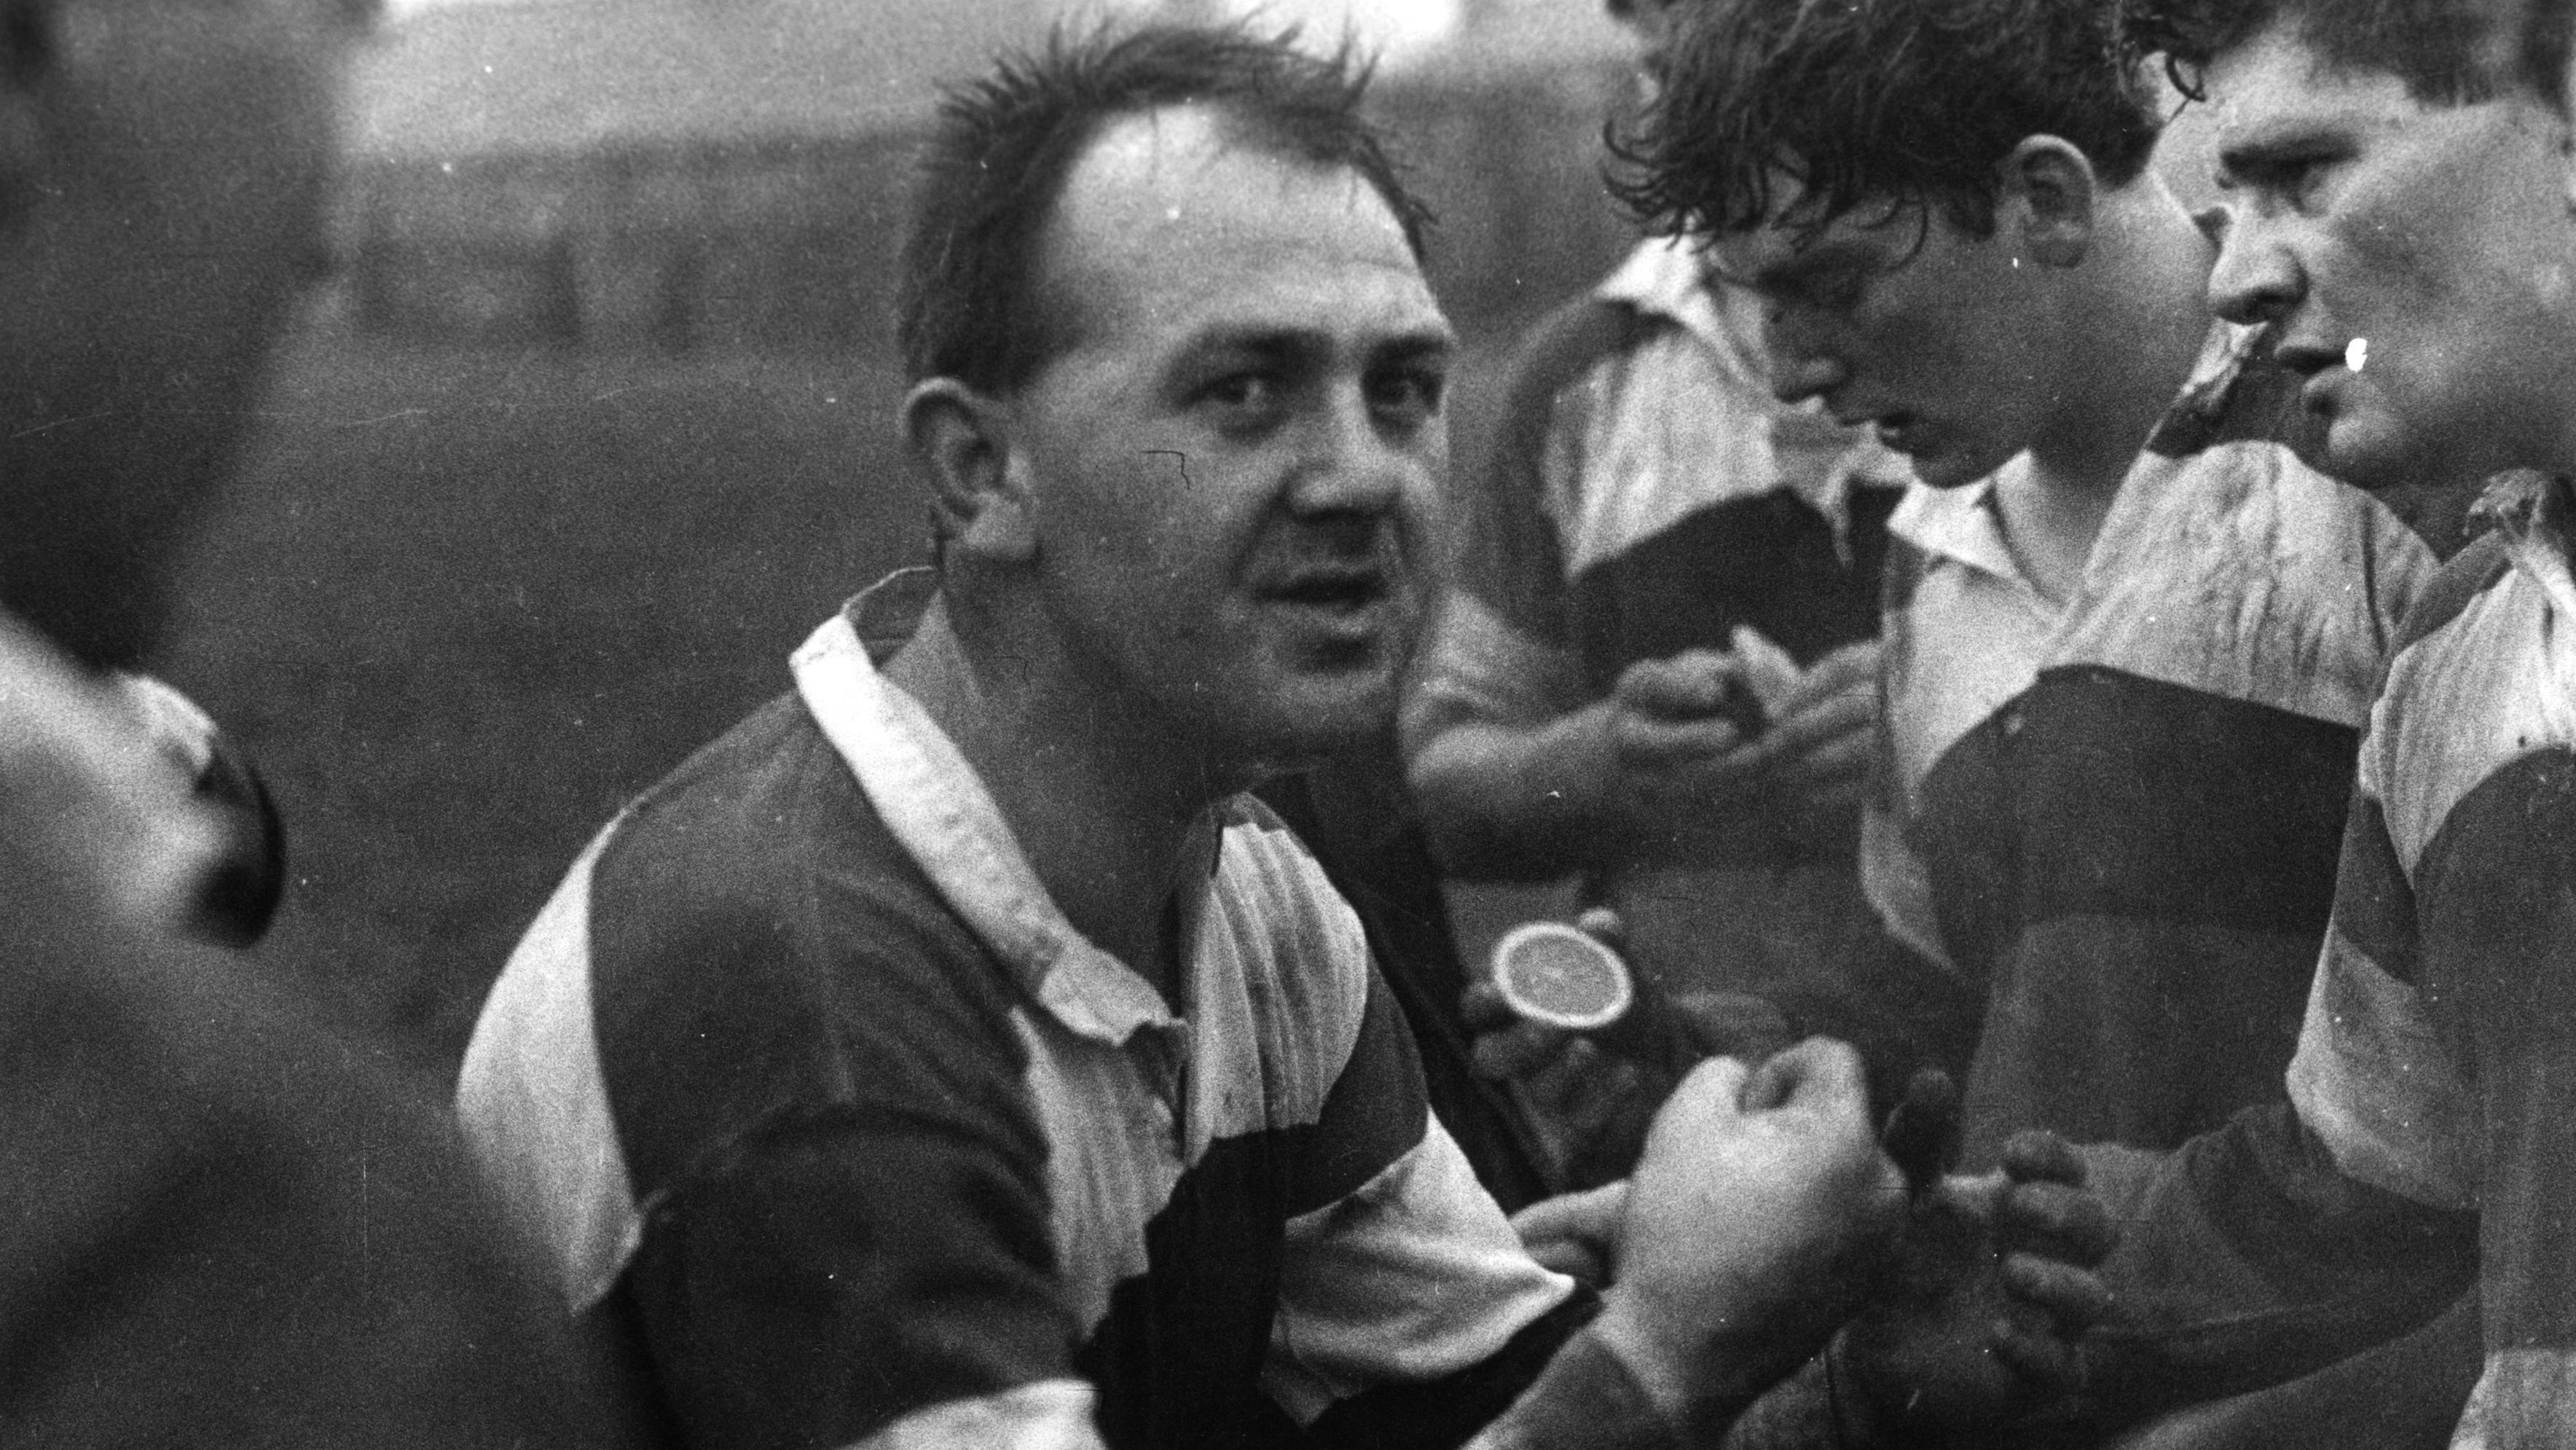 Rugby player Clive Rowlands in 1966.